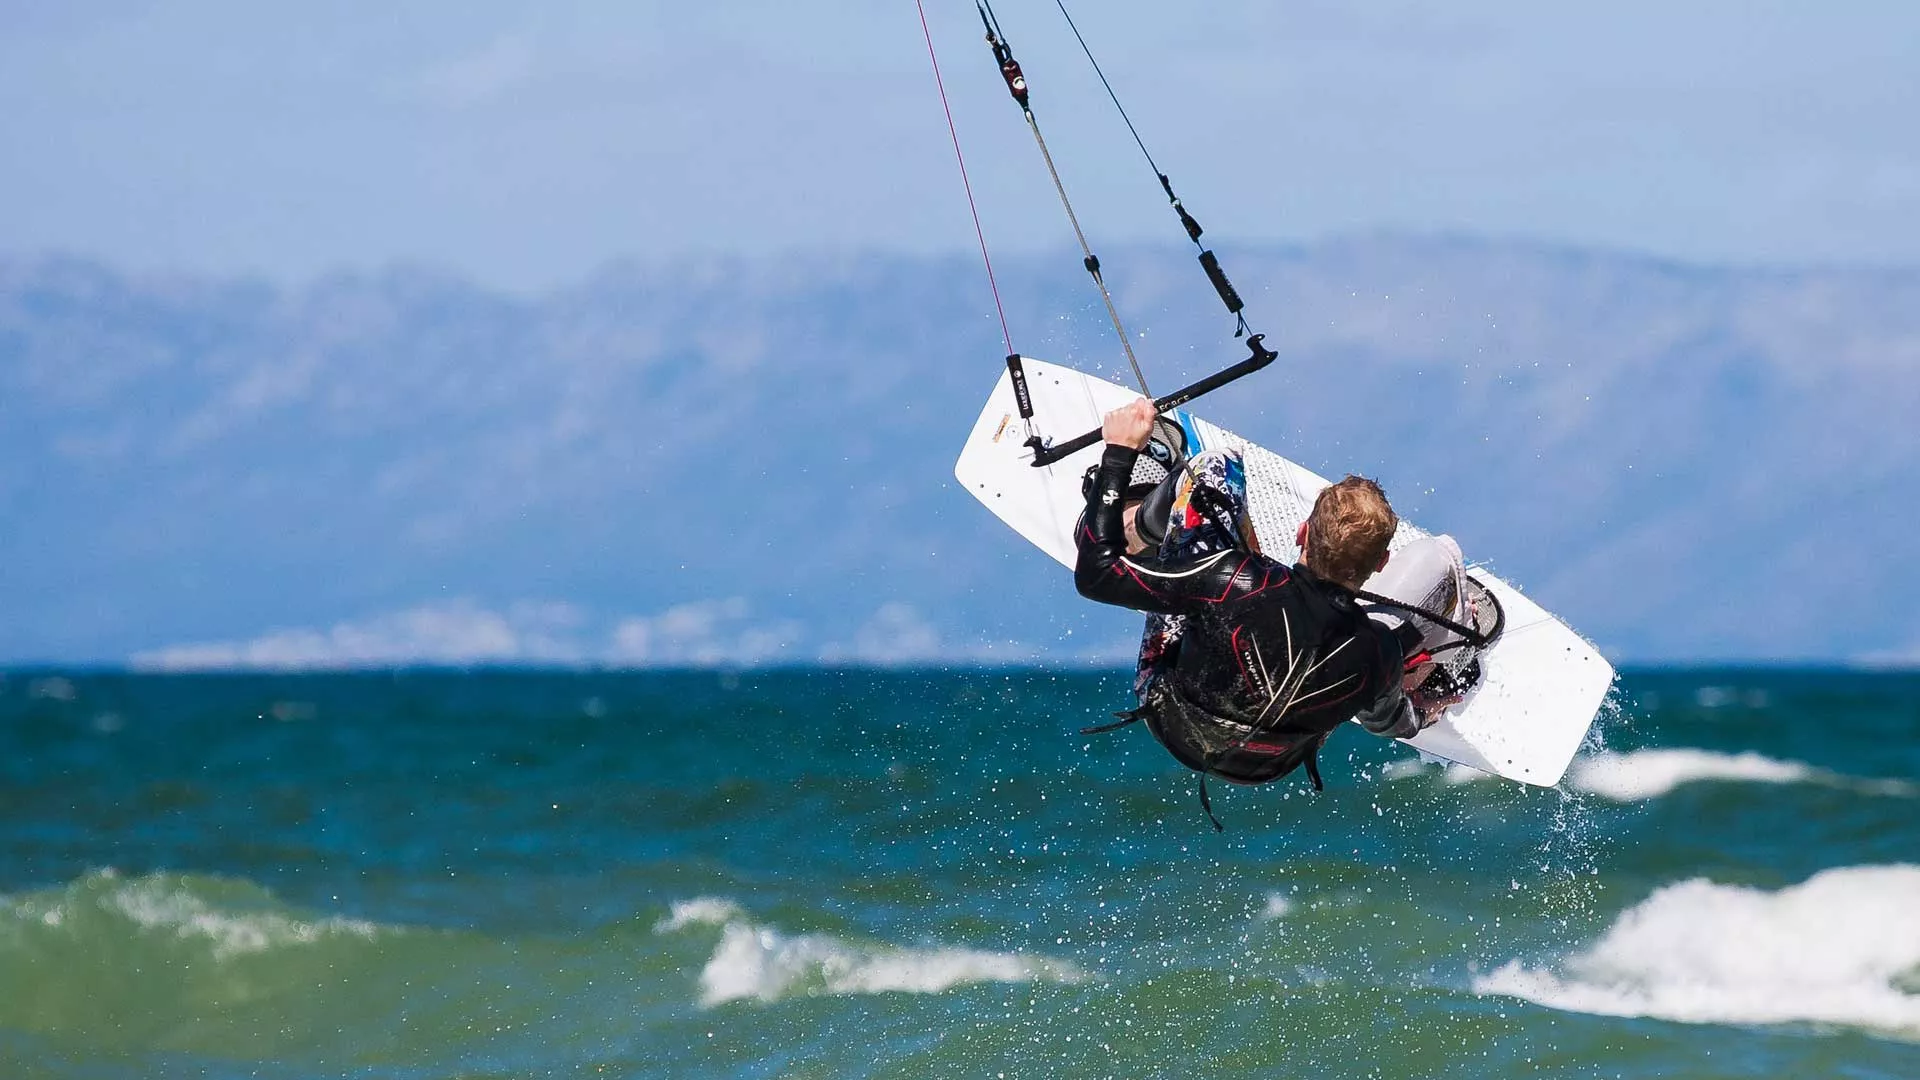 High Five Kitesurf School Cape Town in South Africa, Africa | Kitesurfing - Rated 3.2